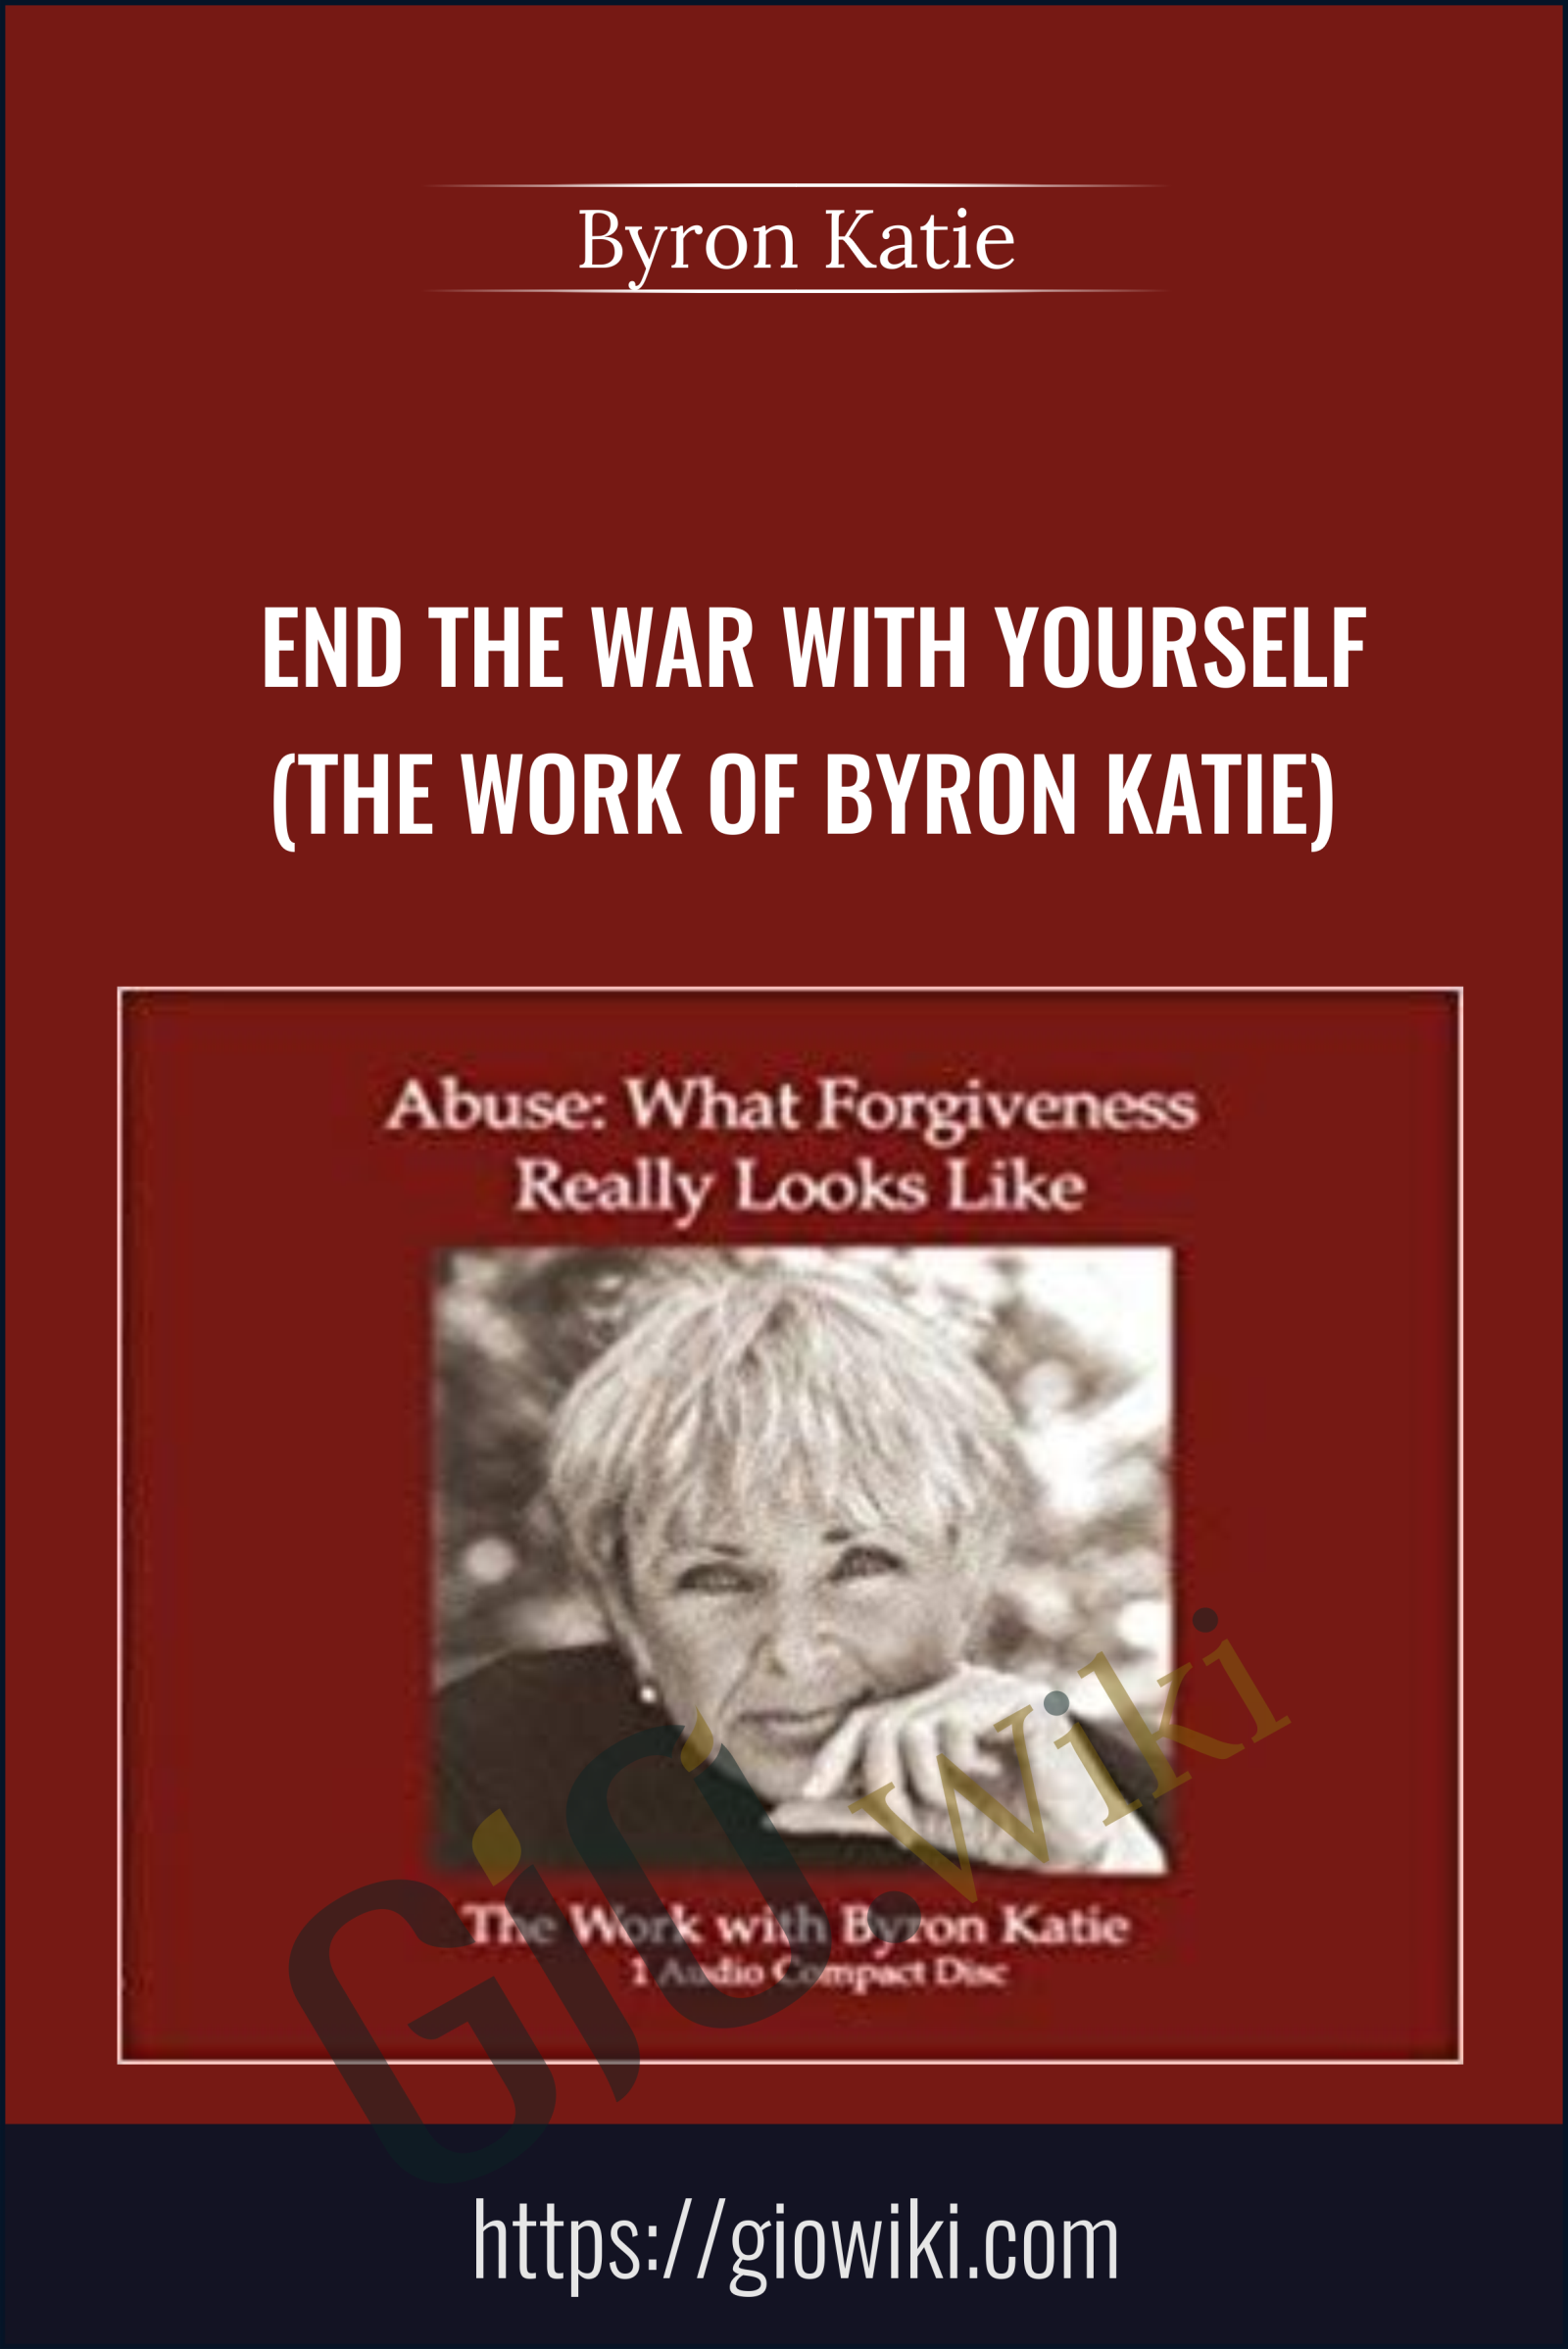 End the War with Yourself (The Work of Byron Katie) - Byron Katie